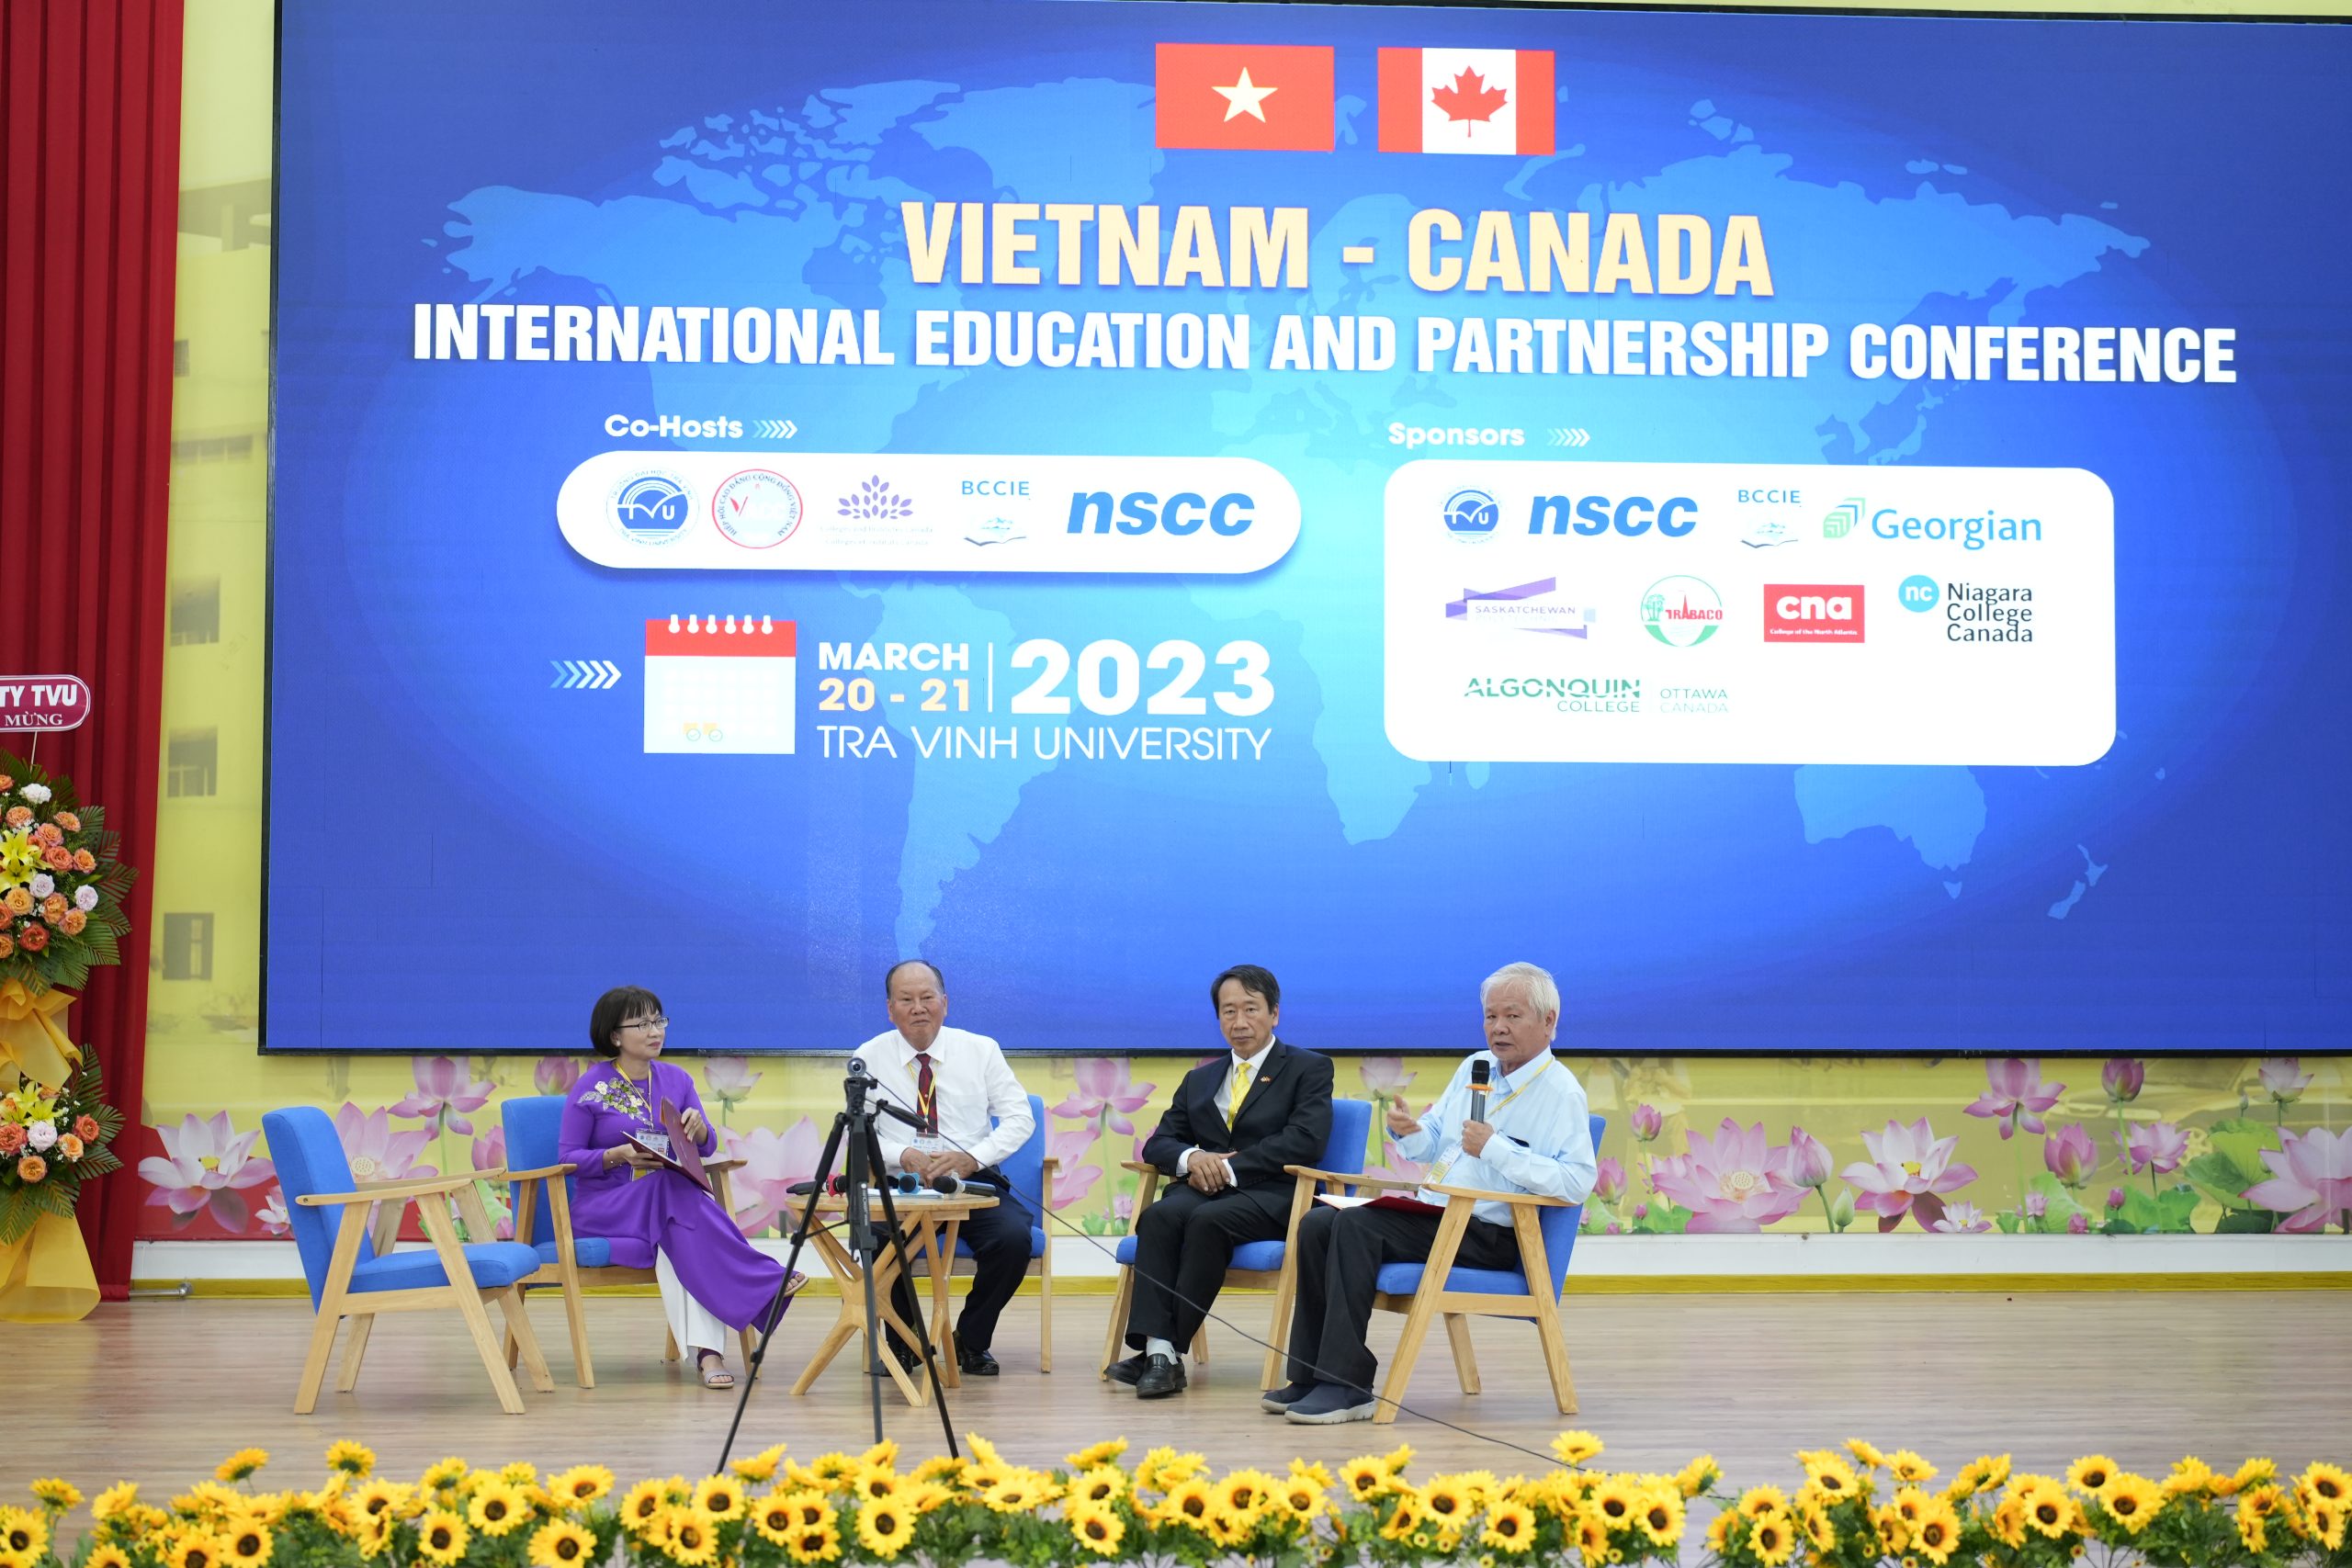 Mr. Tran Hoan Kim, former Chairman of the People's Committee of Tra Vinh Province, Head of the Vietnam-Canada Community College Project Steering Committee, and Chairman of the Advisory Council of Tra Vinh University (second from the left) at the plenary session.